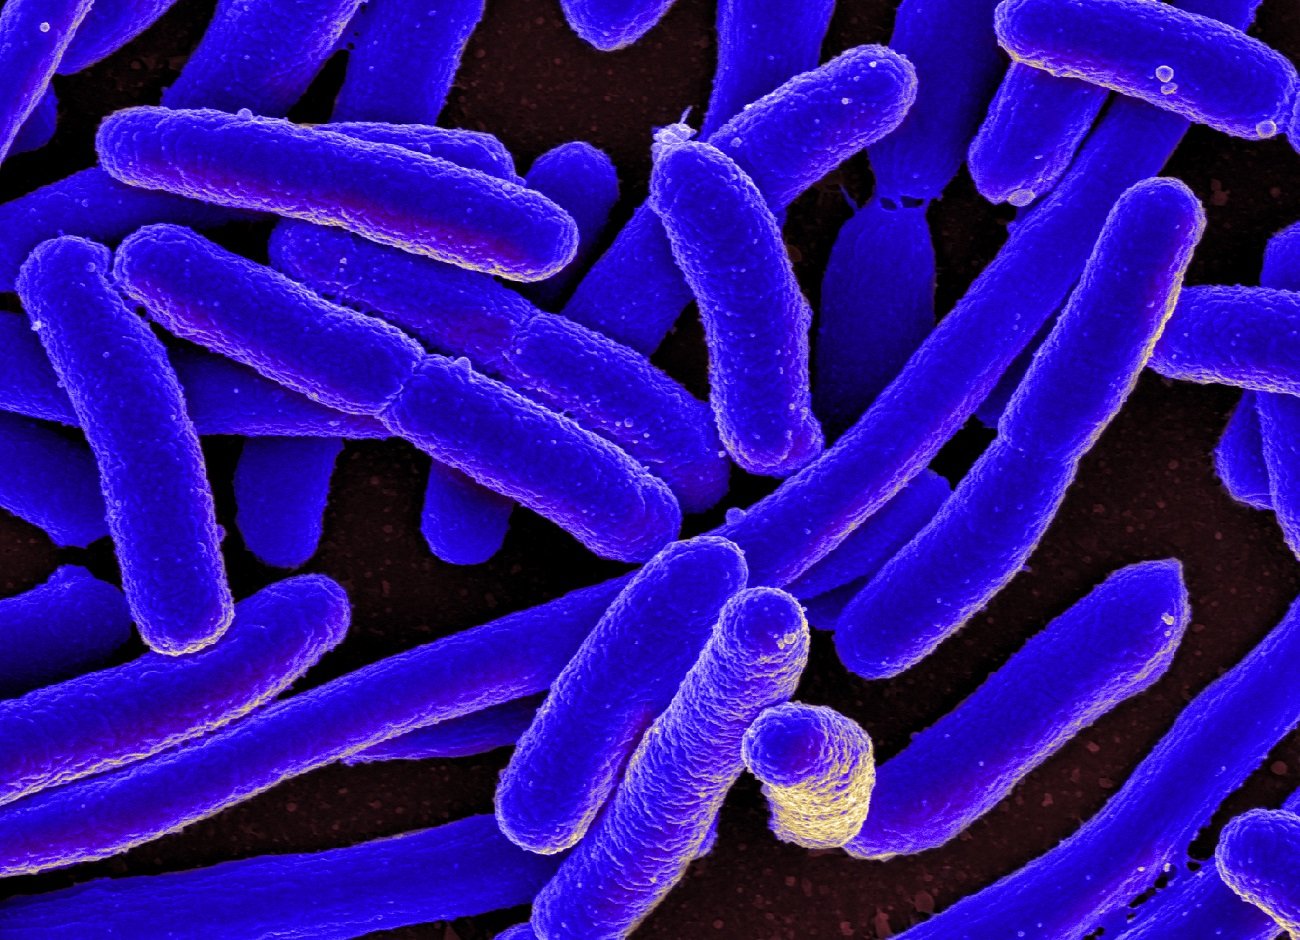 How do bacteria move?  The mystery was solved years ago